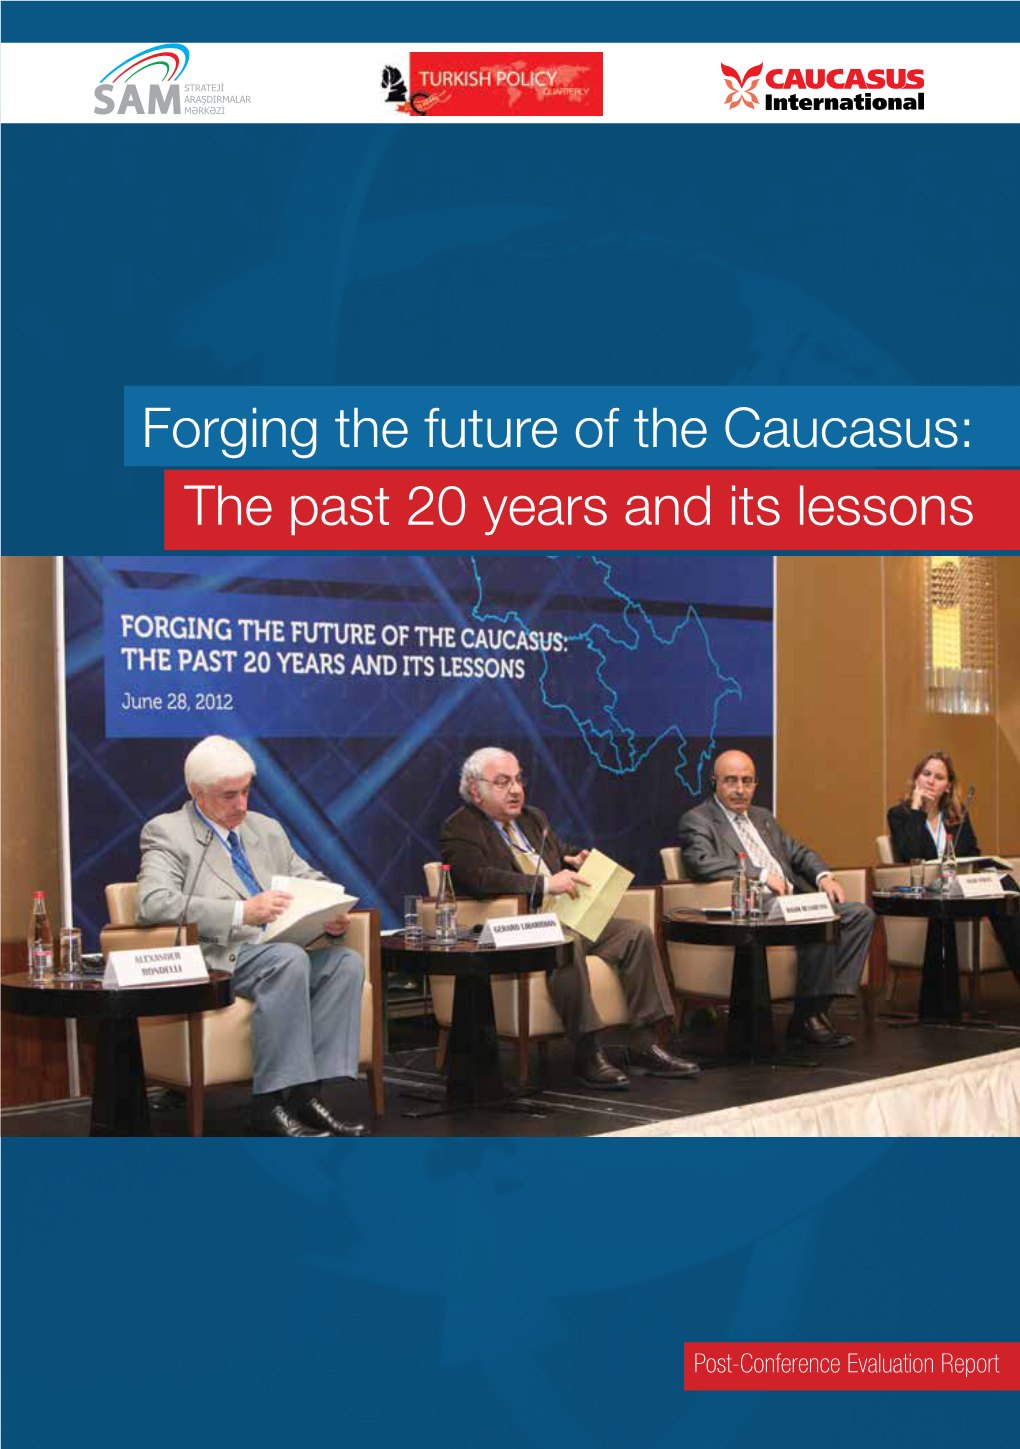 Forging the Future of the Caucasus: the Past 20 Years and Its Lessons